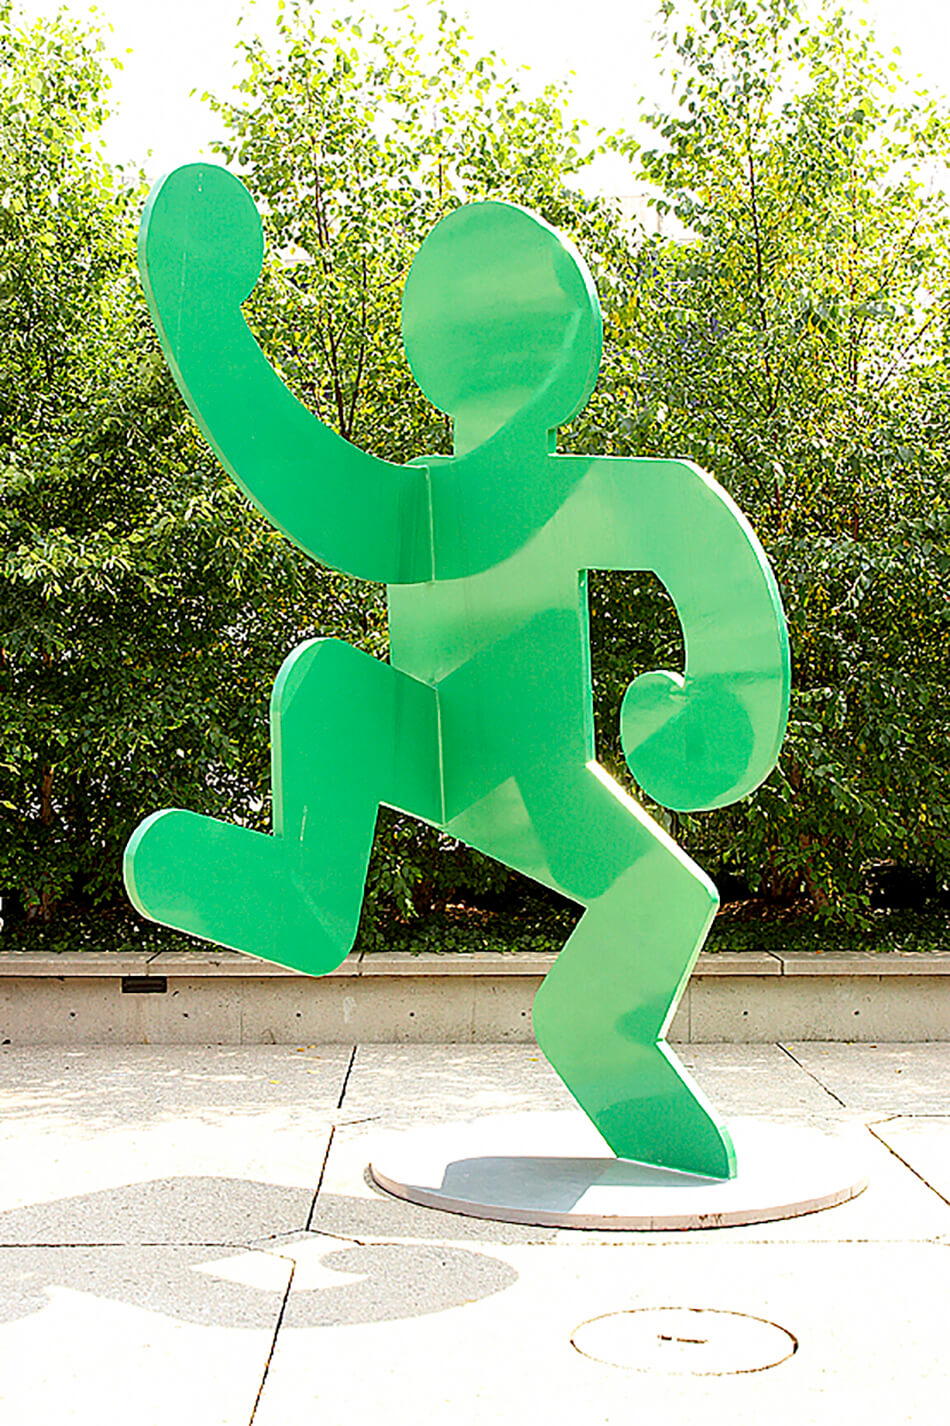 Keith Haring (American 1958-1990), Self Portrait 1989, painted steel, ed. 2/3. The Joey and Toby Tanenbaum Collection, 2002. 